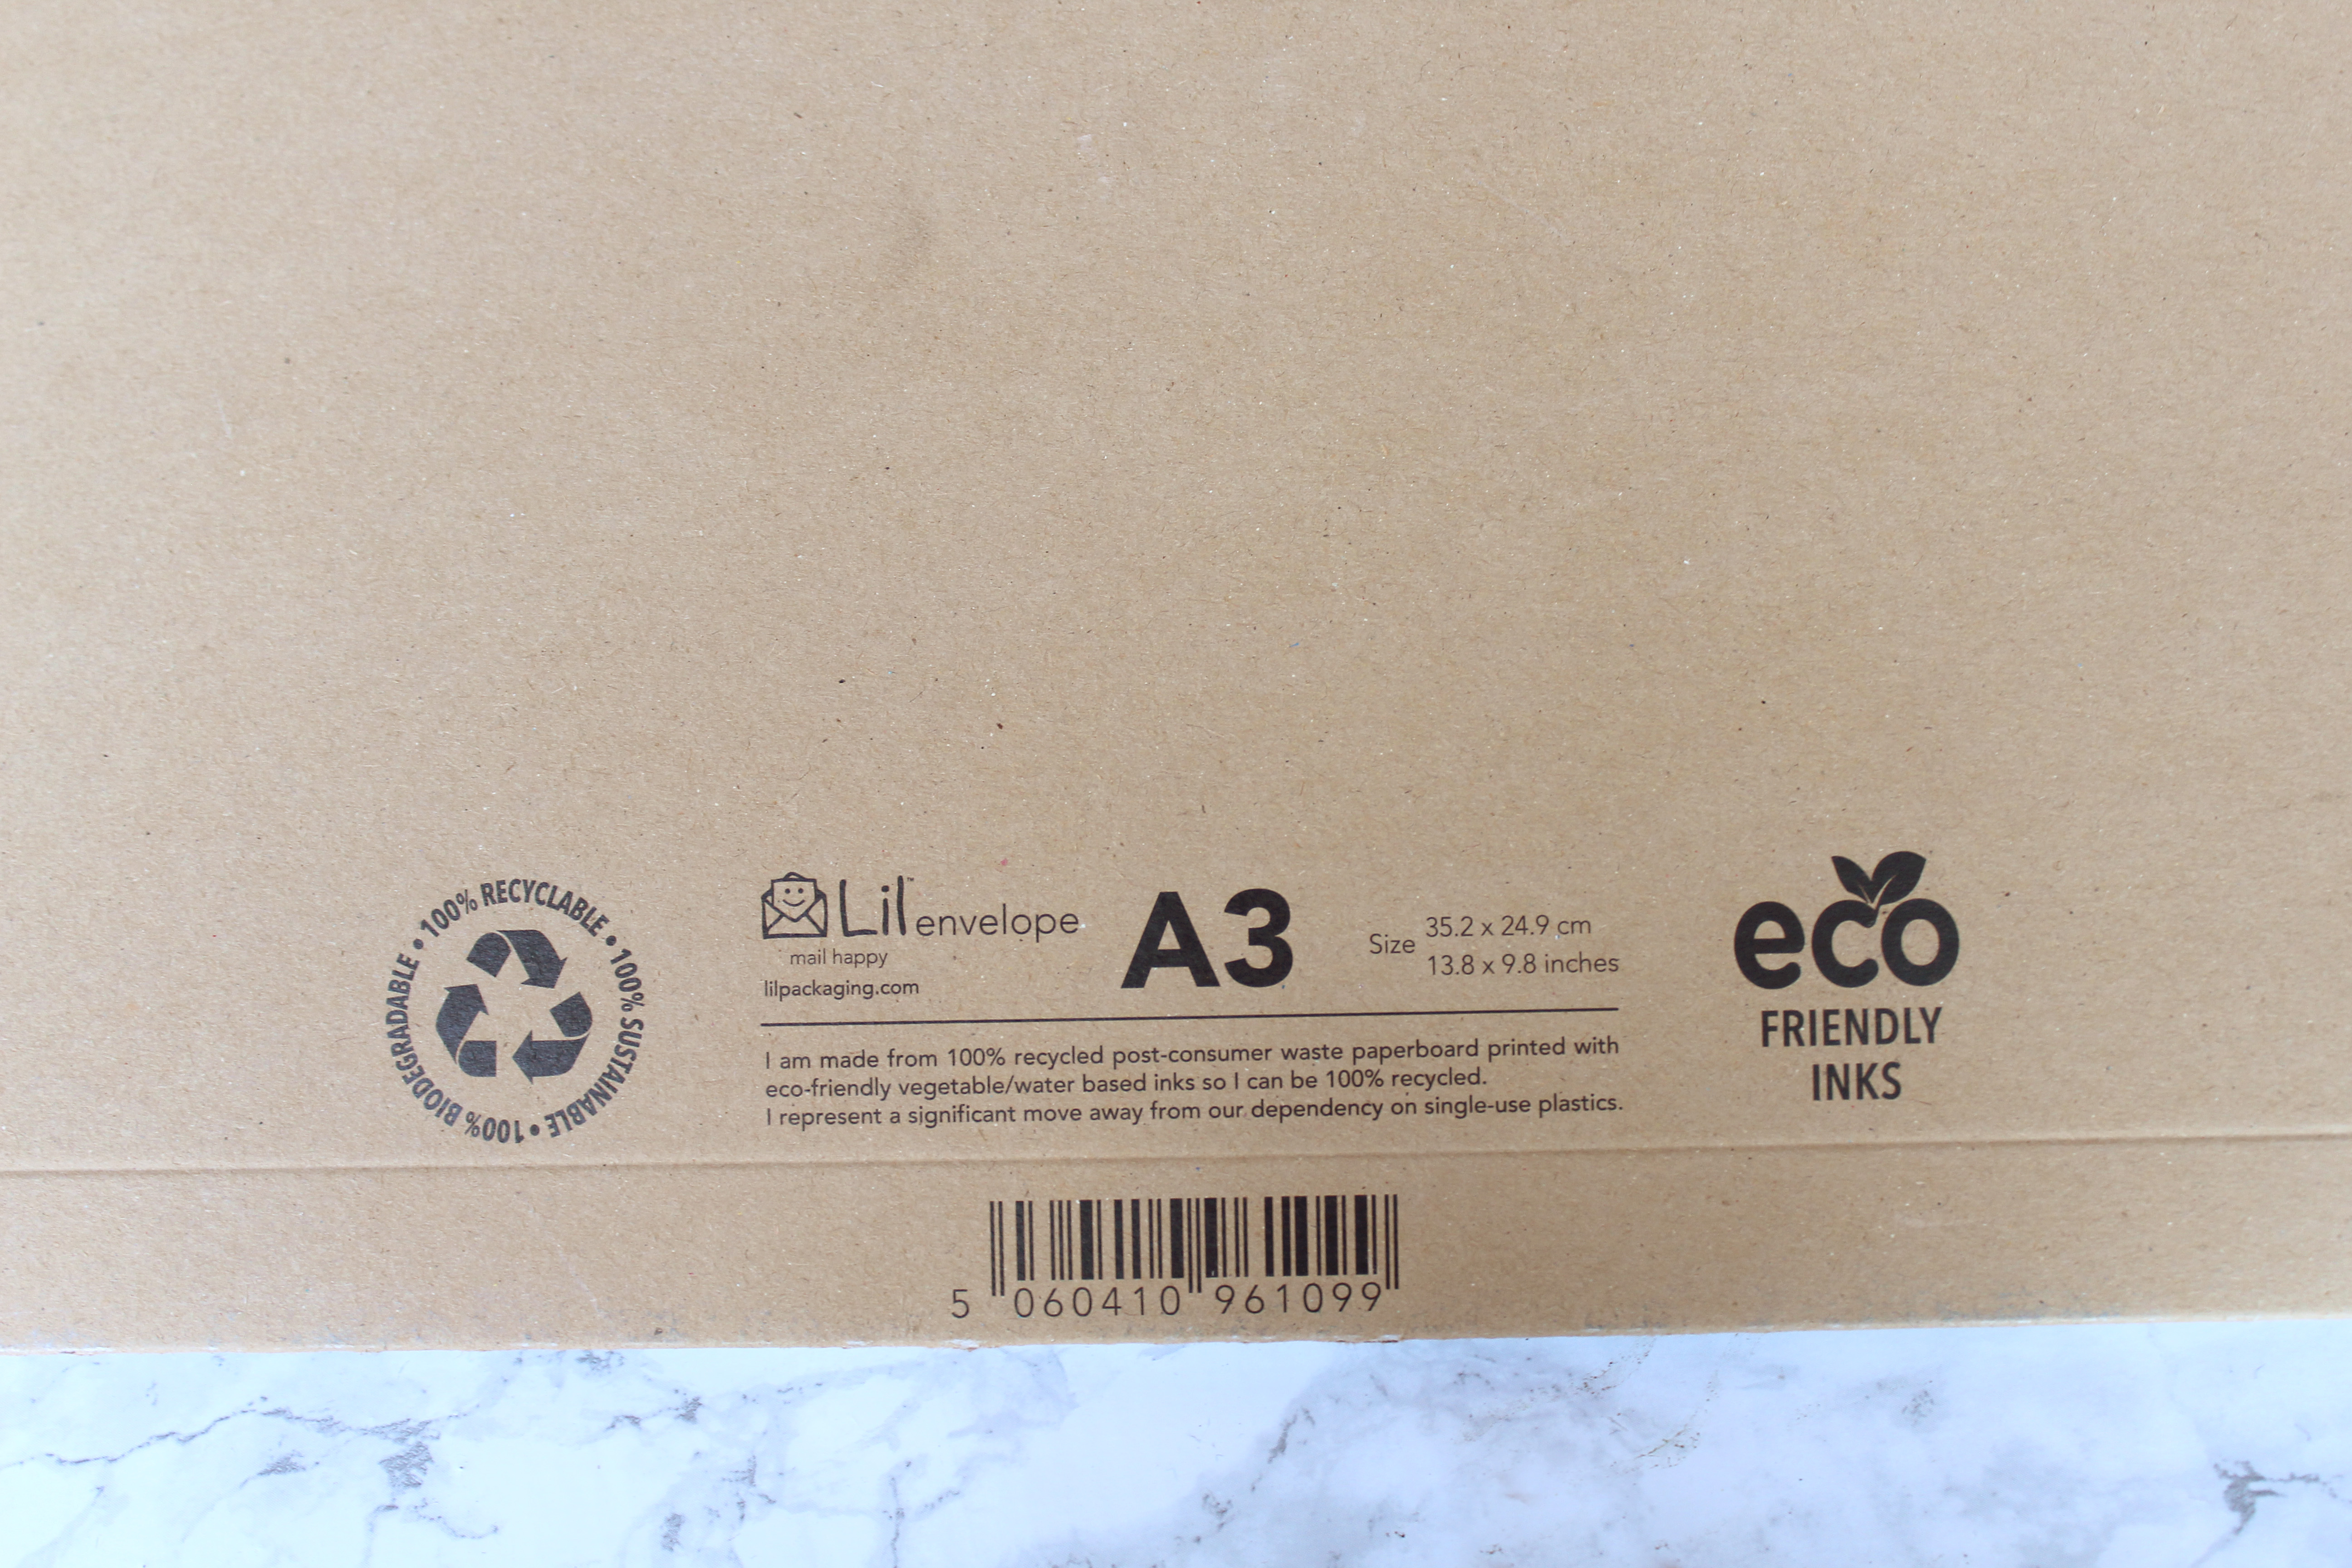 Eco-friendly cardboard envelopes with eco friendly inks.